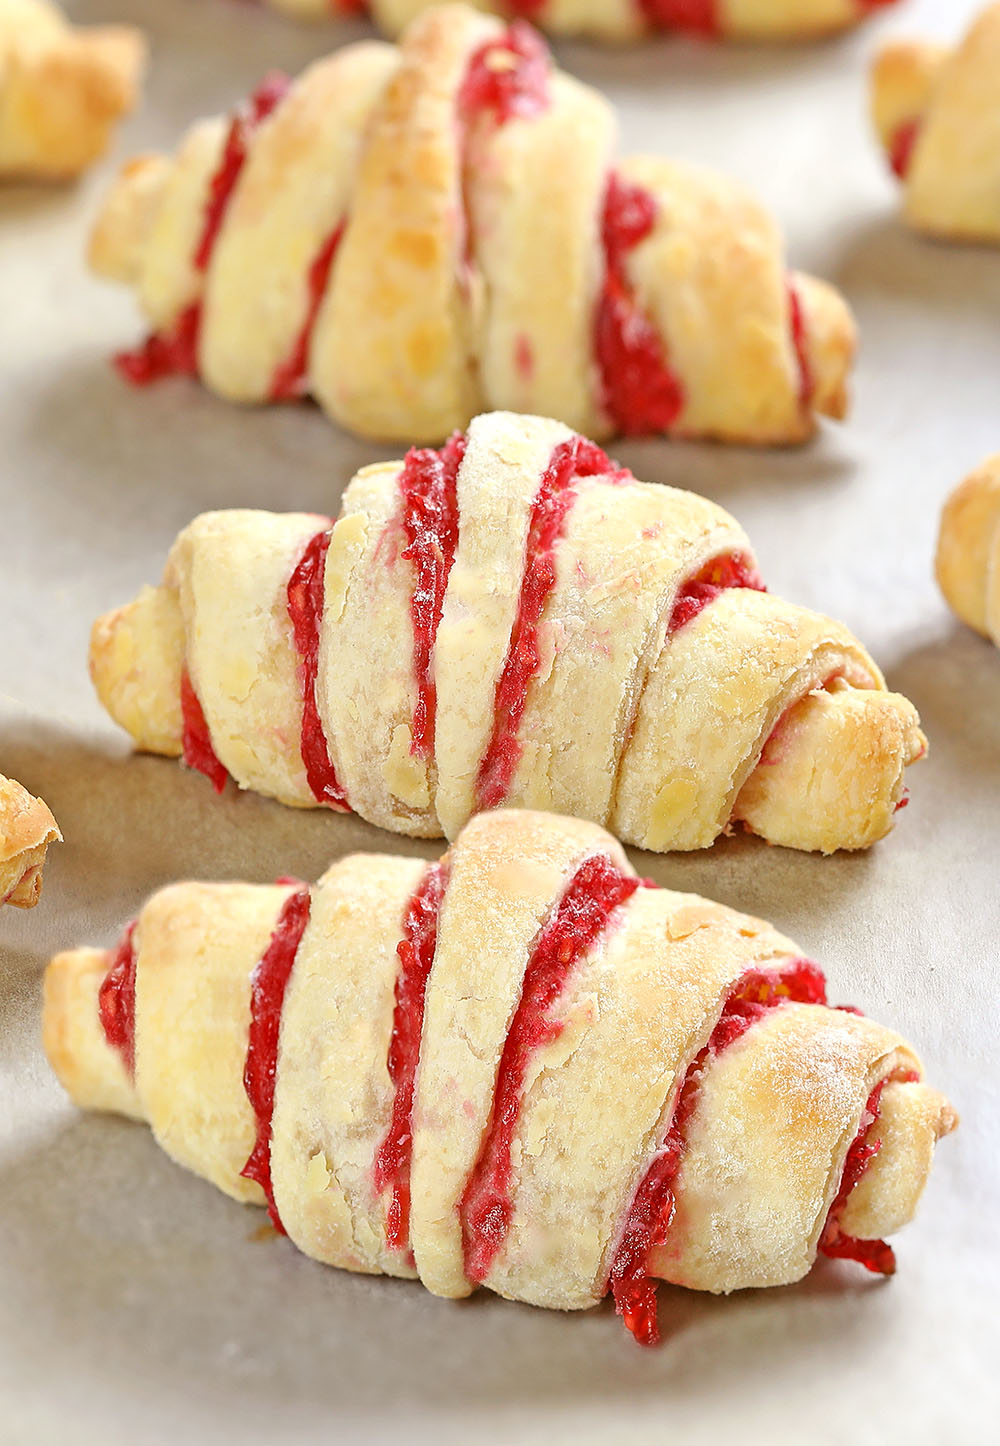 Mini Raspberry Cheesecake Crescent Rolls is a quick and easy recipe, perfect for Spring or Summer breakfast! You’ll love the amazing bright raspberry flavor.